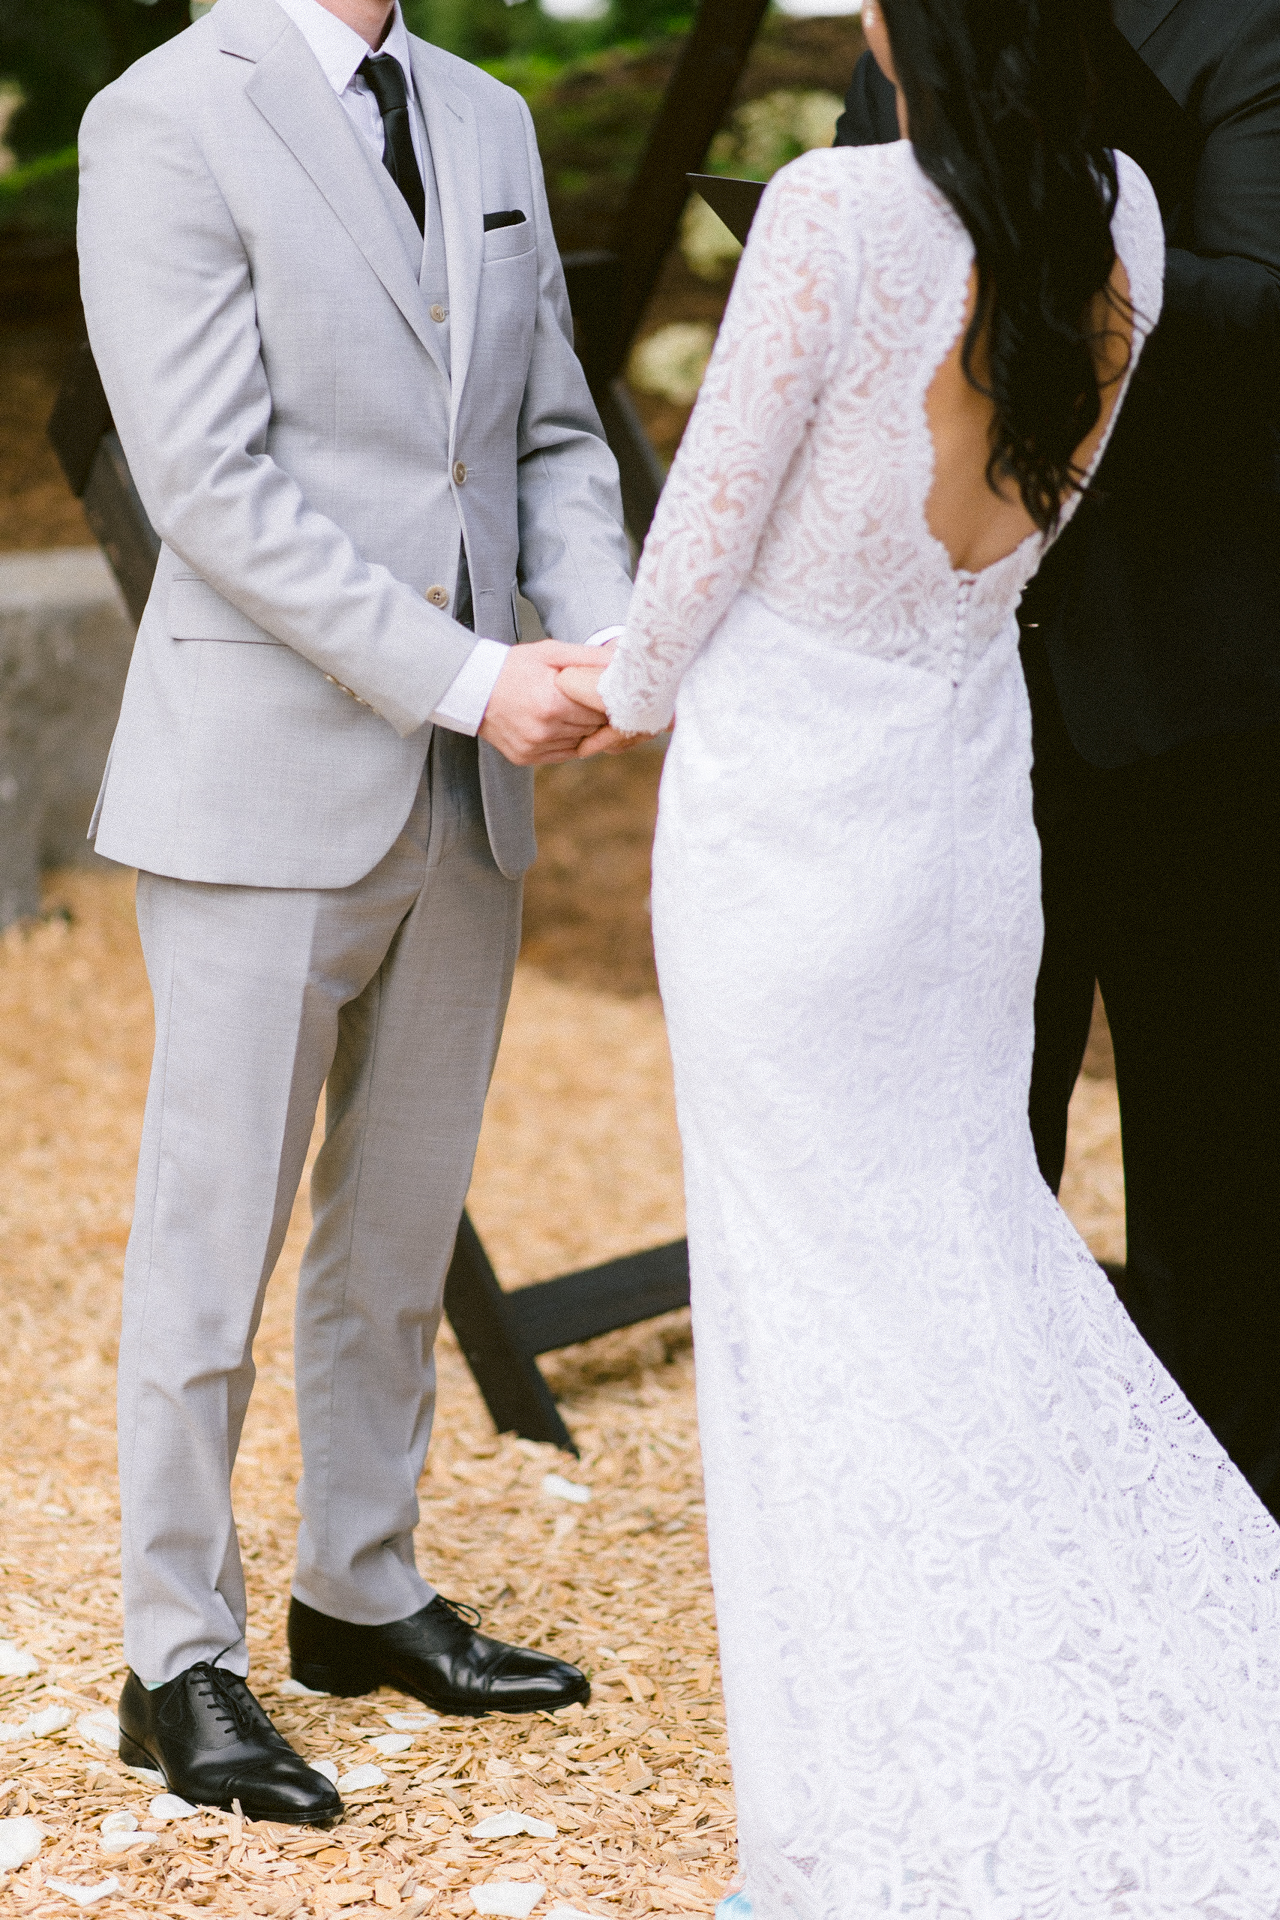 Bride and groom holding hands on their wedding day, with the focus on their interlocked hands and wedding attire.